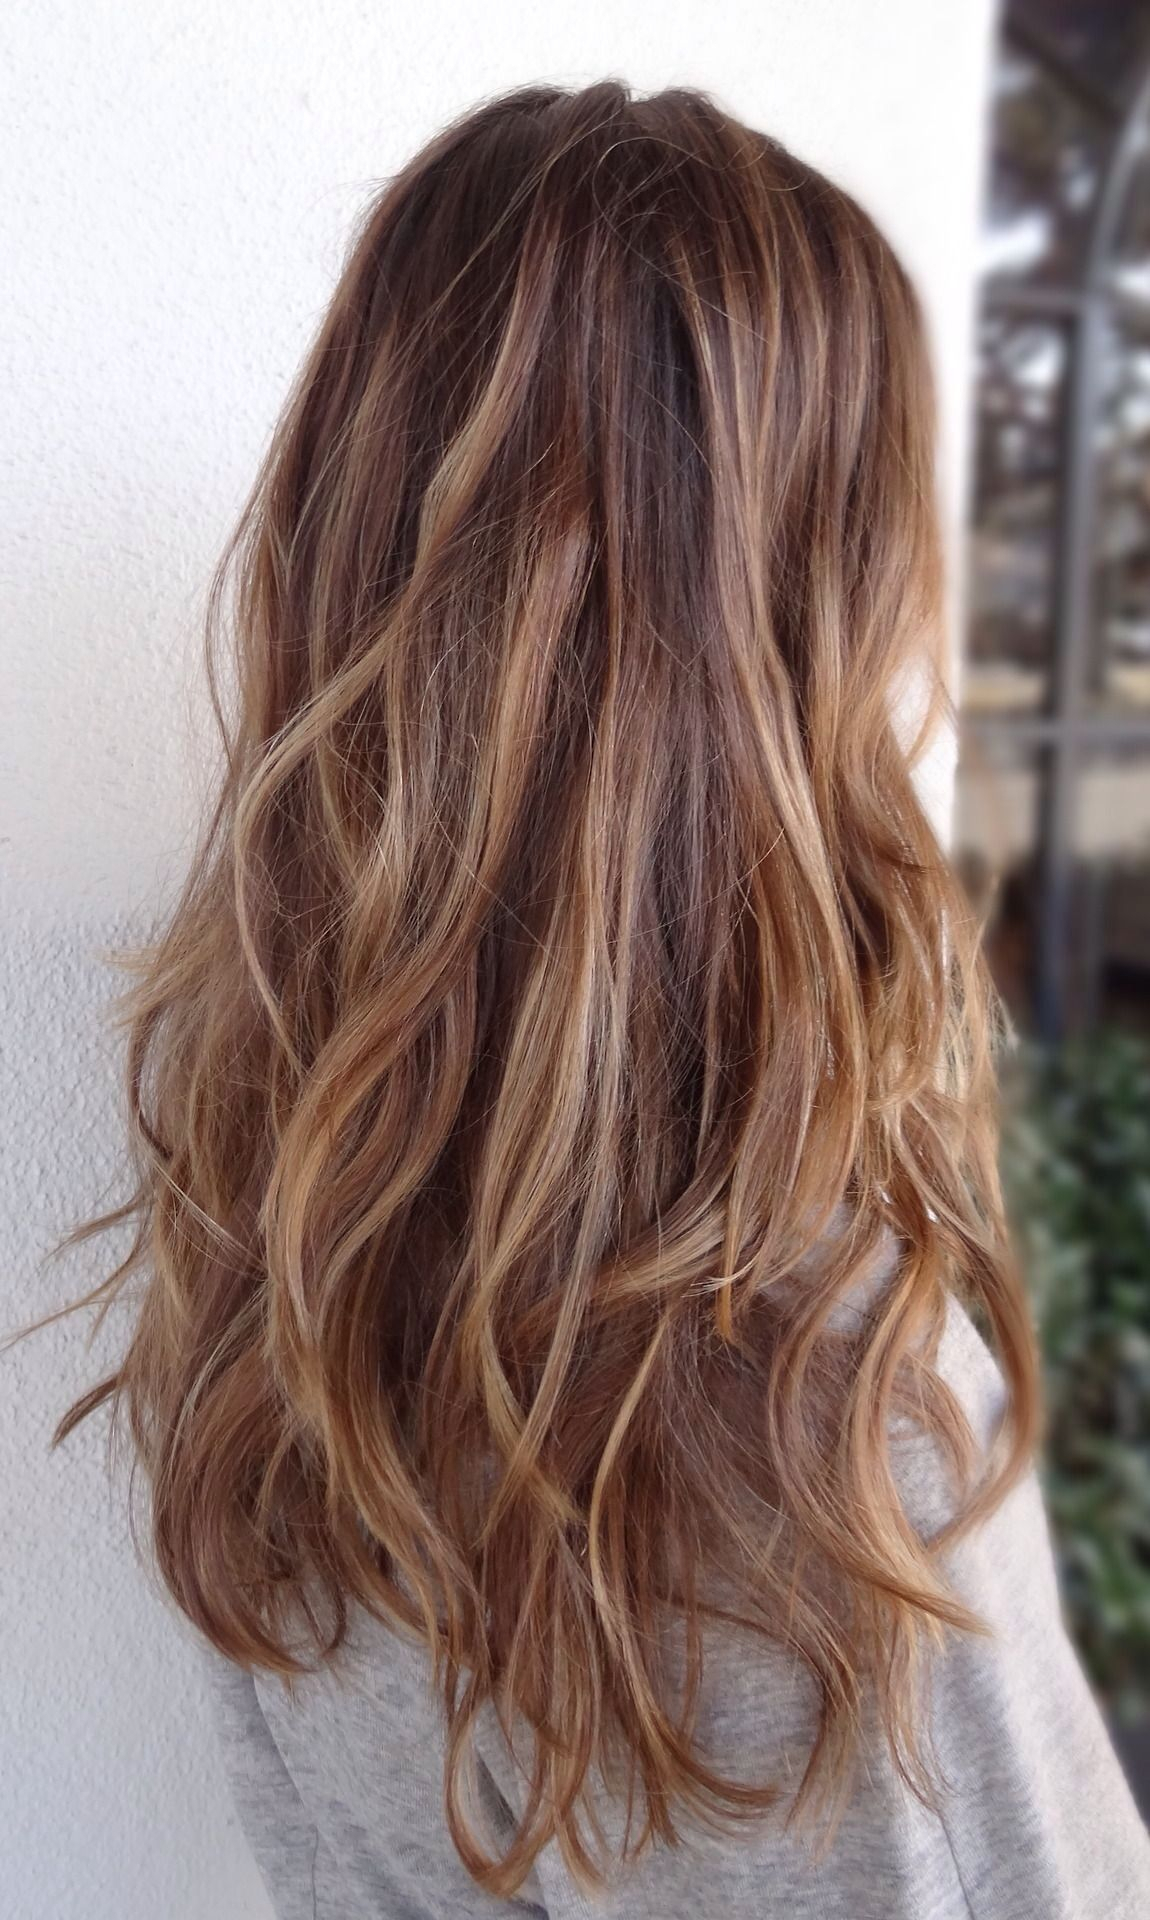 10 Awesome Long Haircut And Color Ideas 40 hottest hair color ideas for 2018 brown red blonde balayage 2024